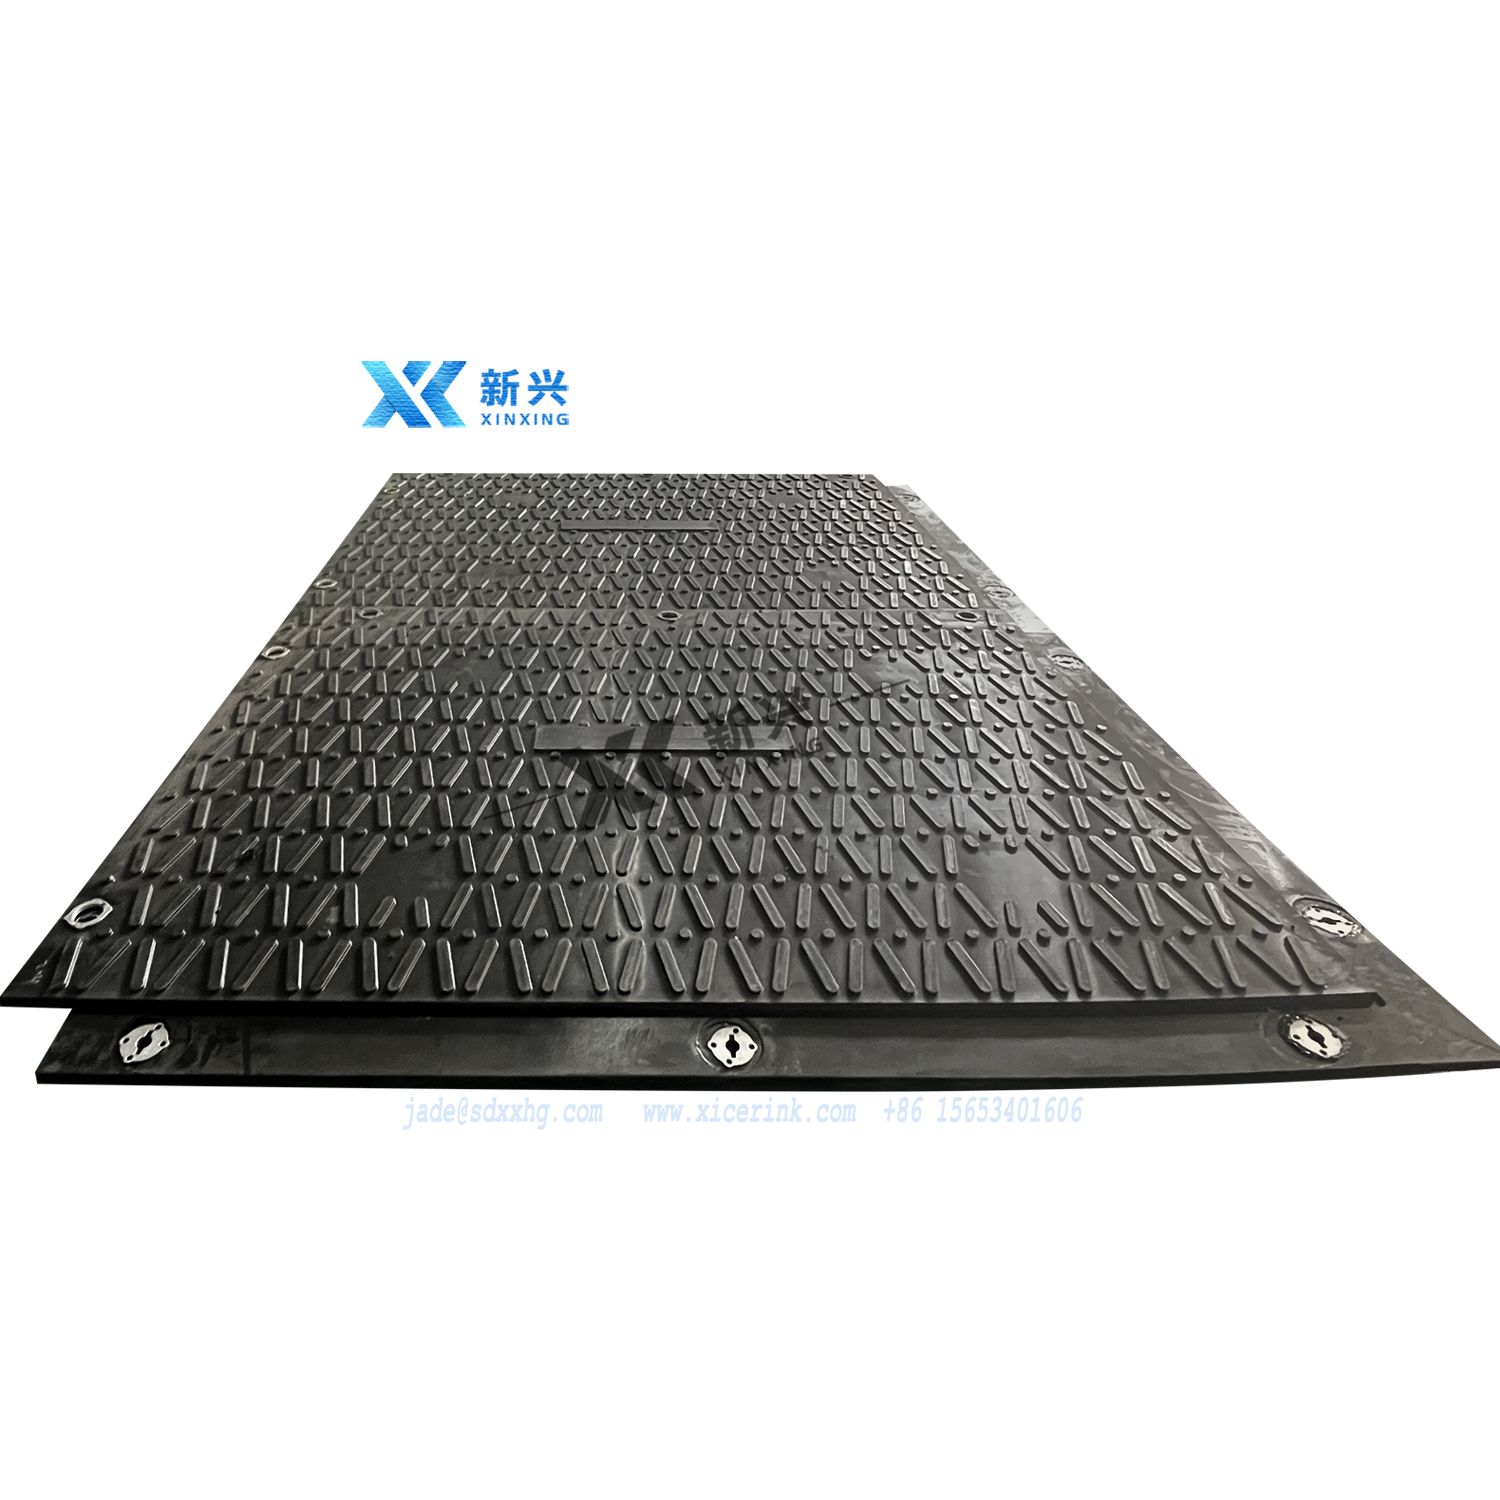 How to choice the ground protection mats